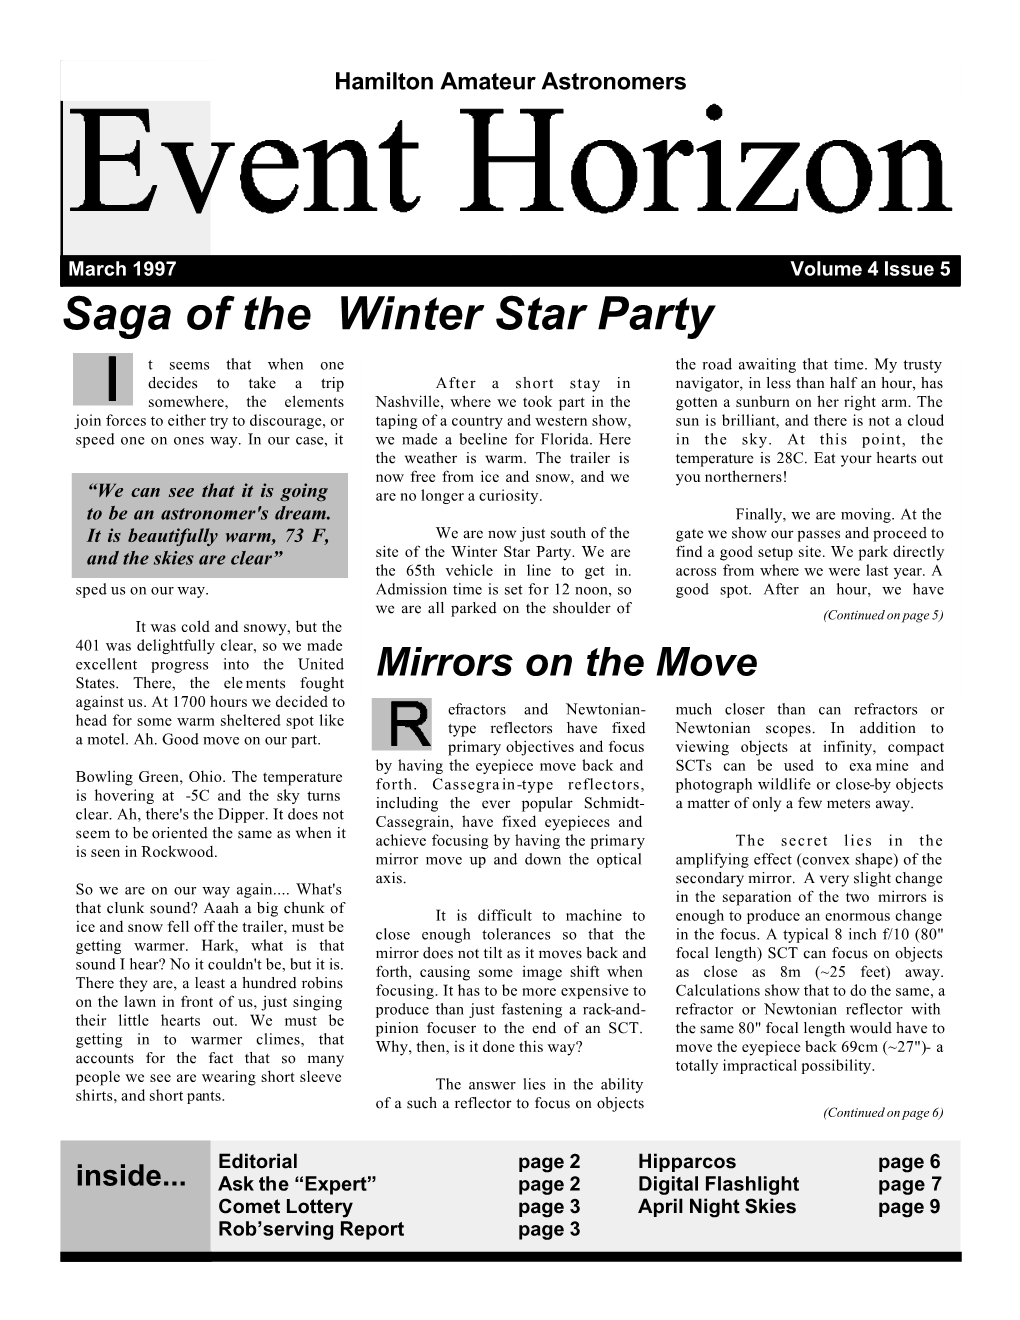 Saga of the Winter Star Party